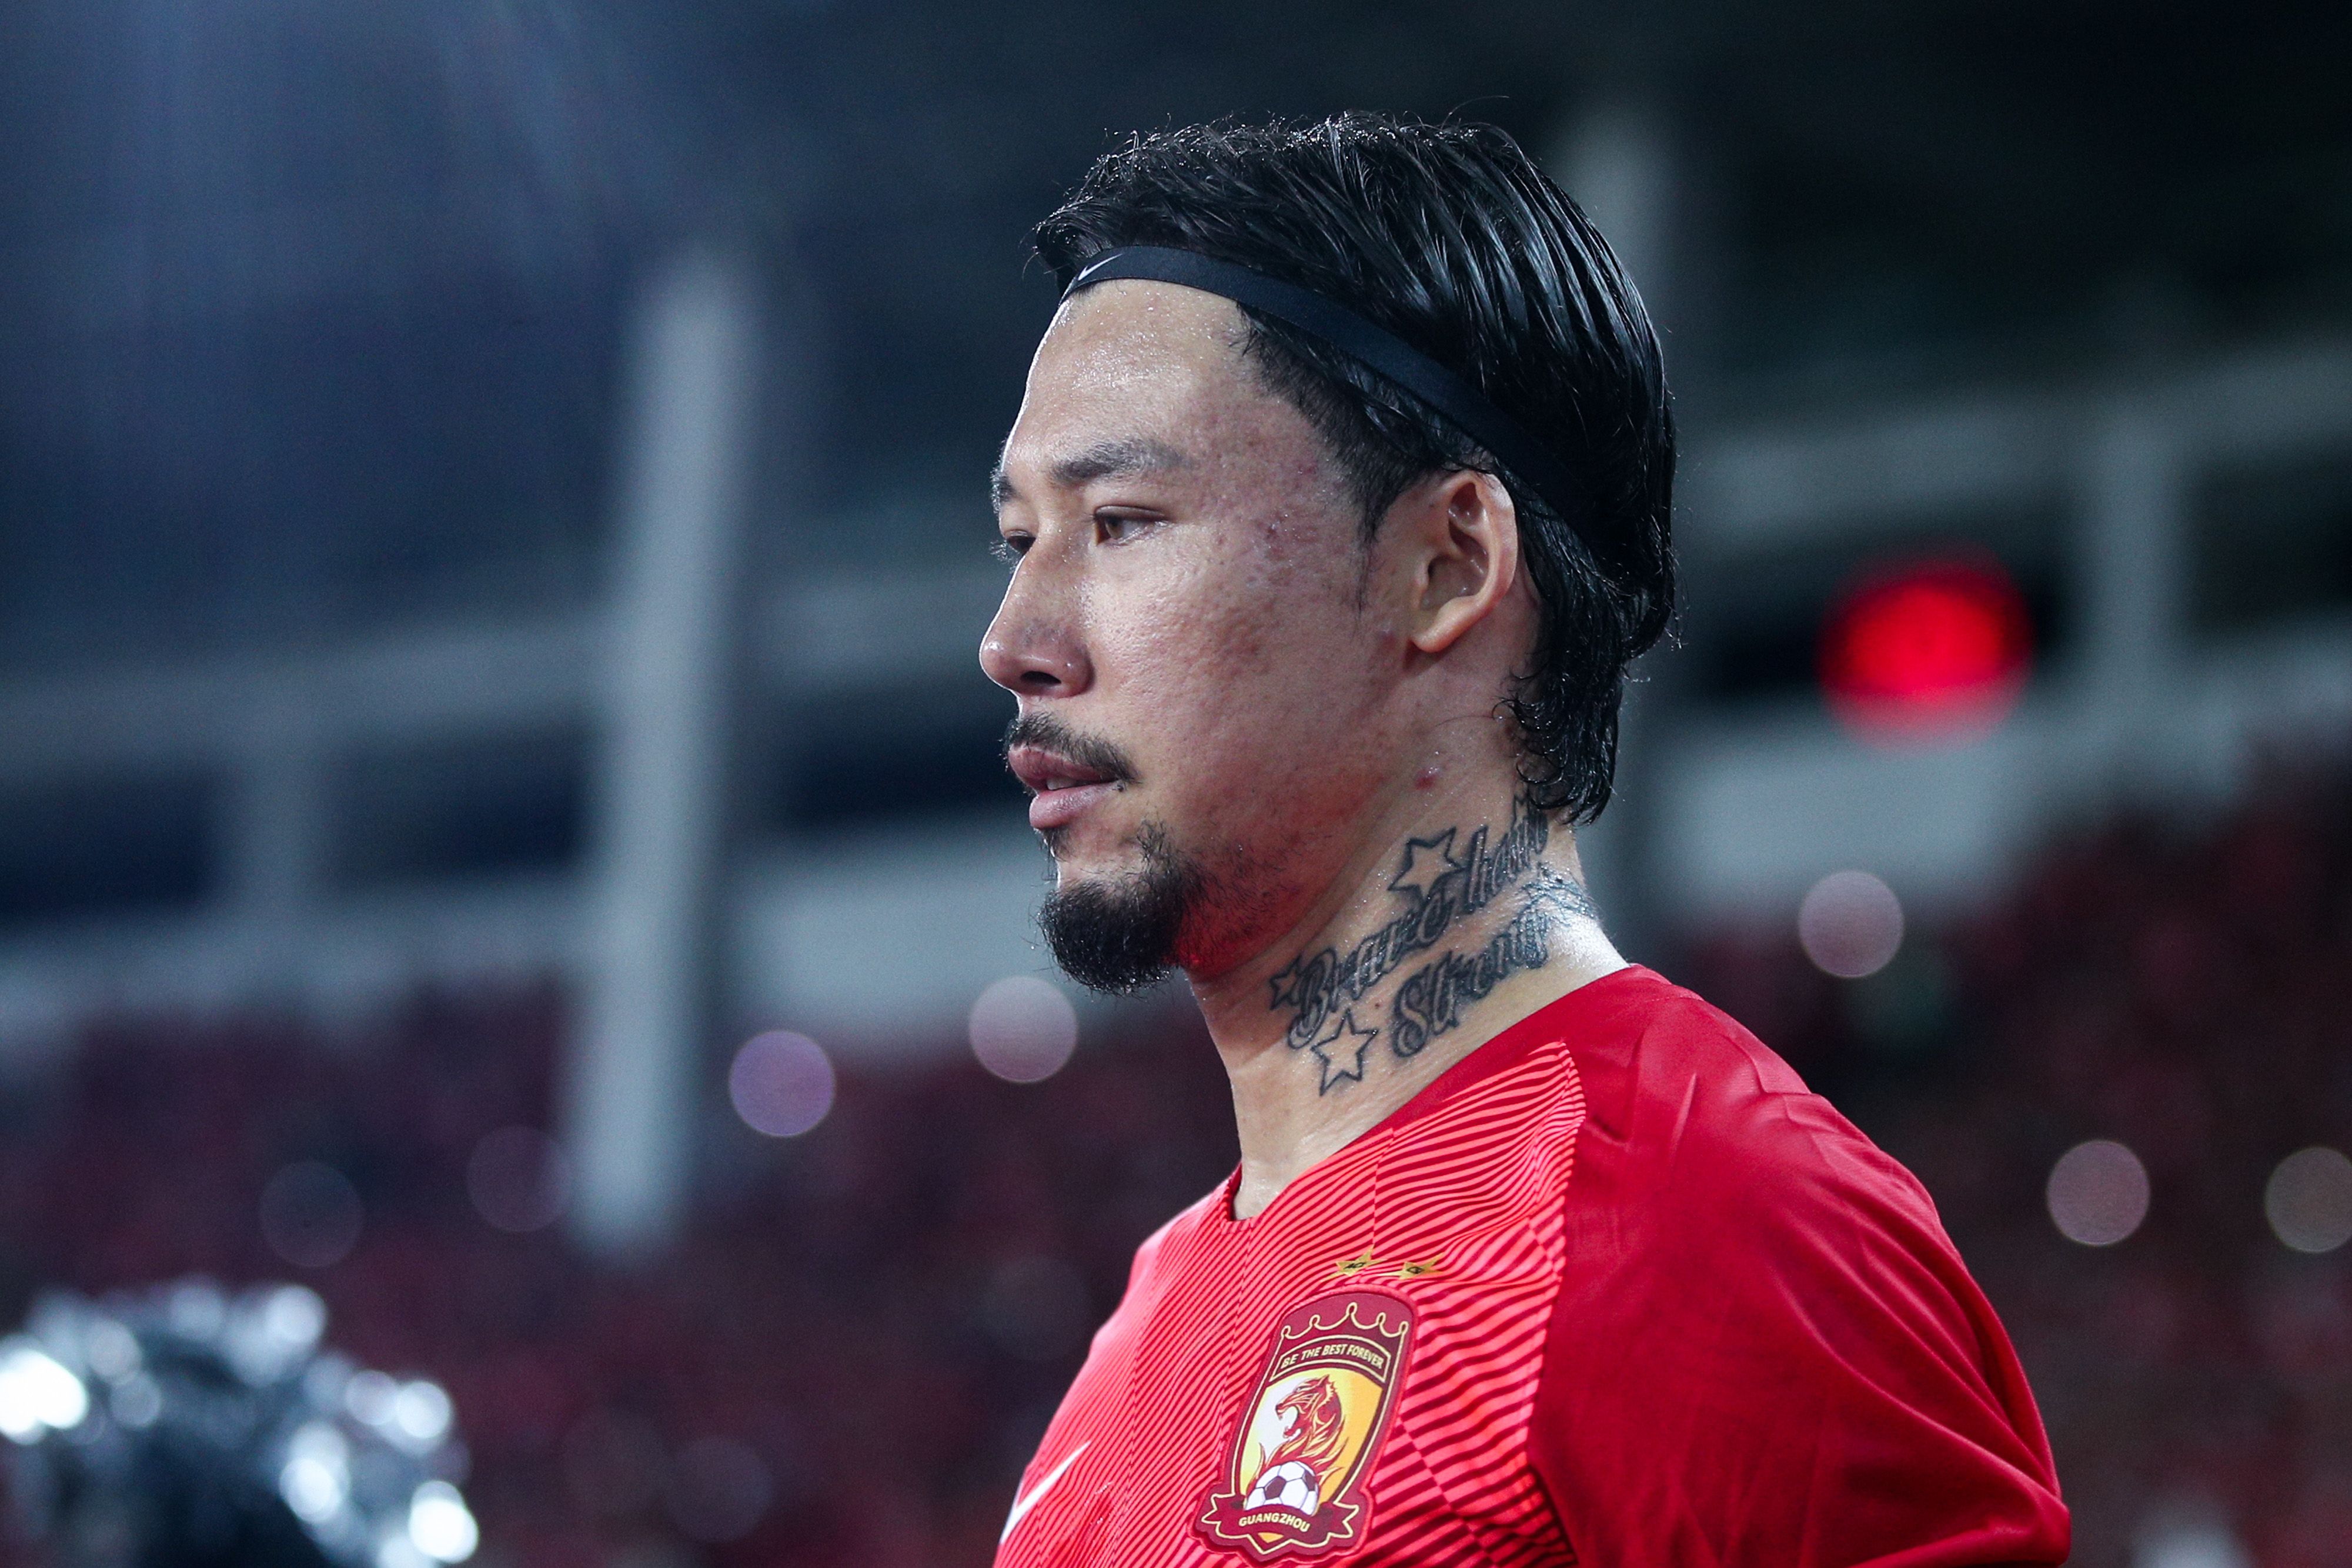 China bans footballers from getting tattoos | CNN